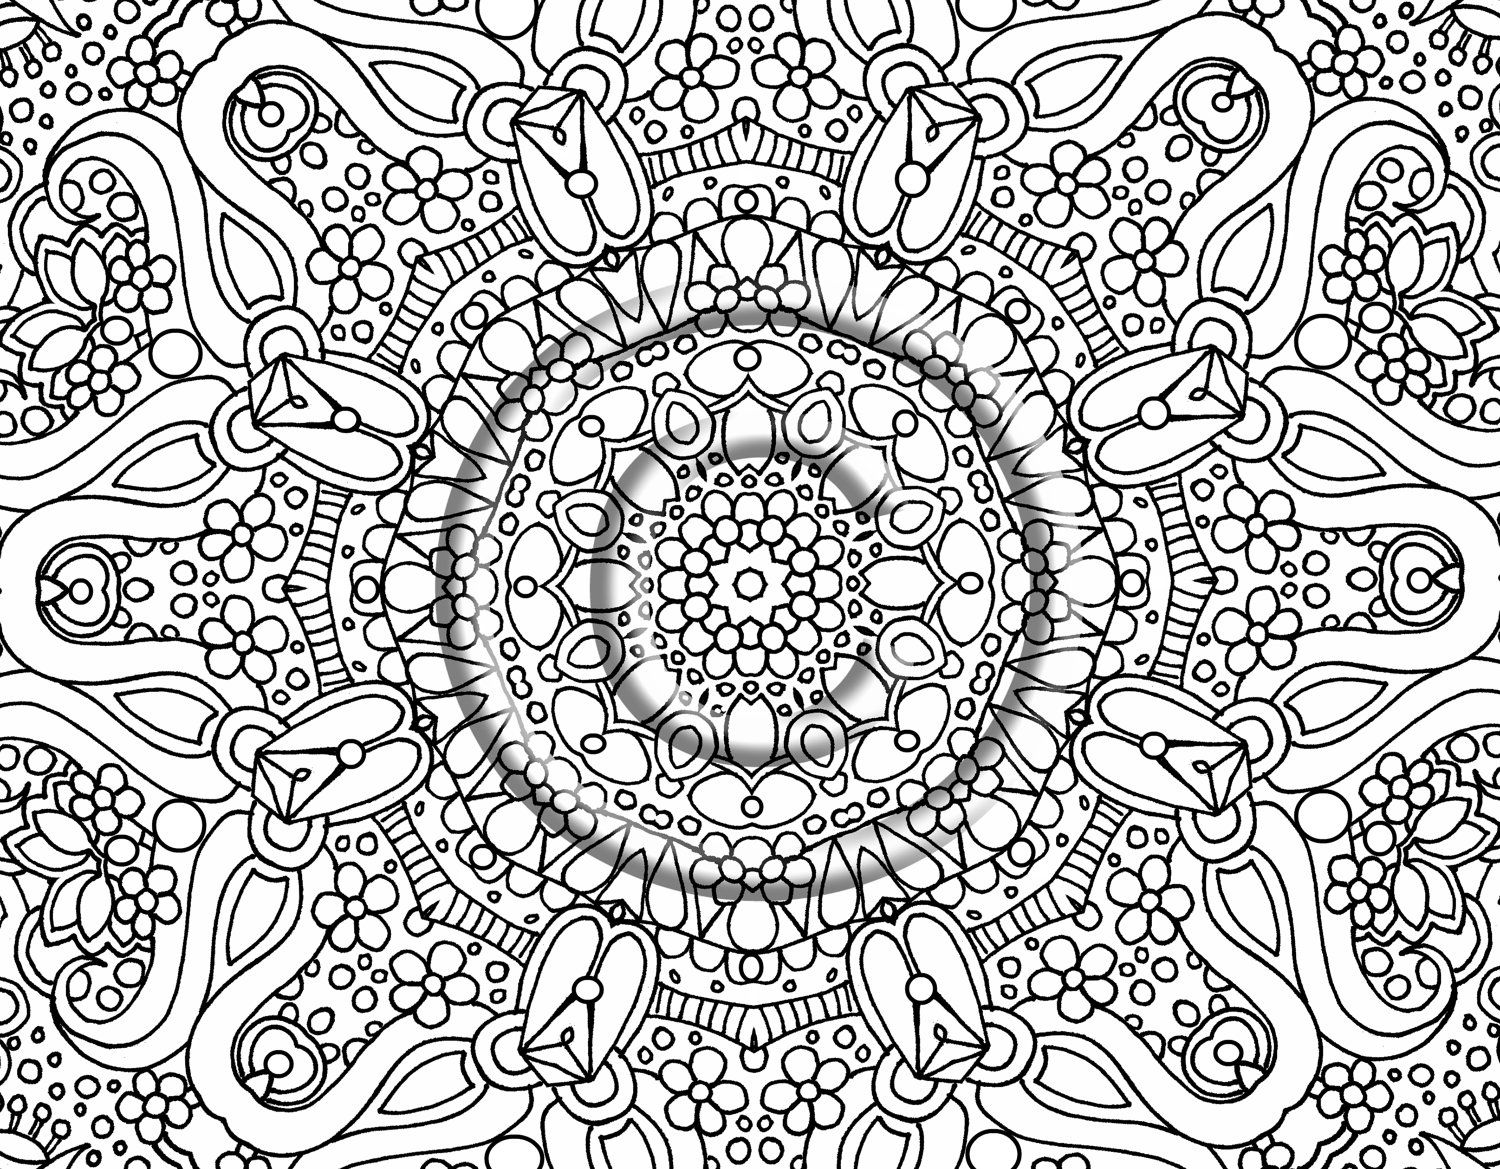 Abstract Art Coloring Pages (20 Pictures) - Colorine.net | 5877